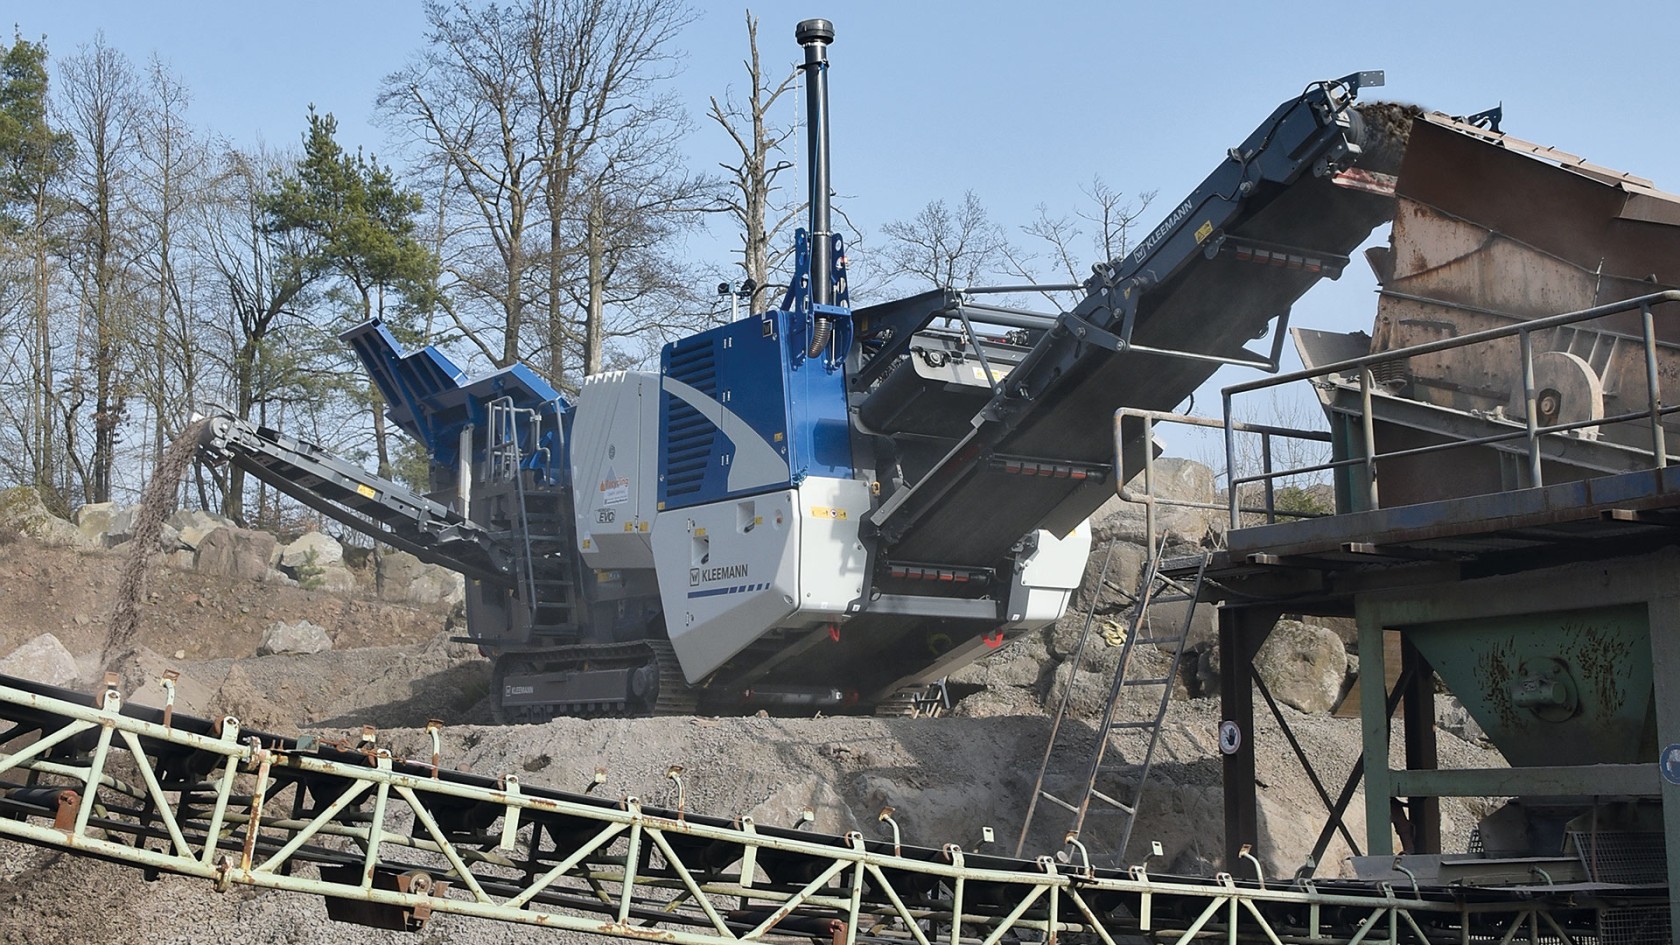 The Kleemann MOBICAT MC 110(i) EVO2 jaw crusher in operation at the quarry